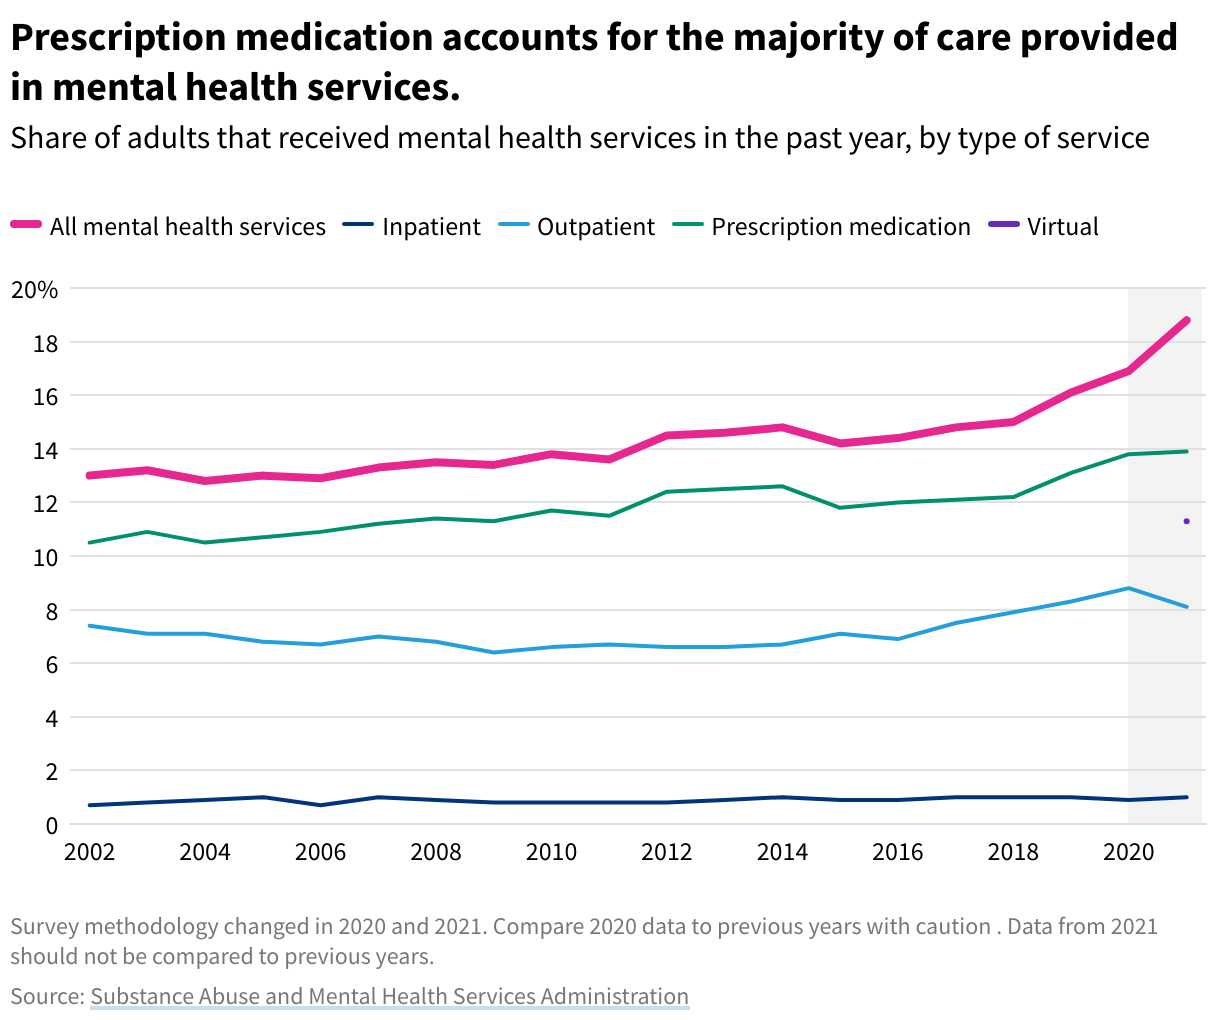 Share of adults that received mental health services in the past year, by type of service. Prescription medication accounts for the majority of care provided in mental health services.